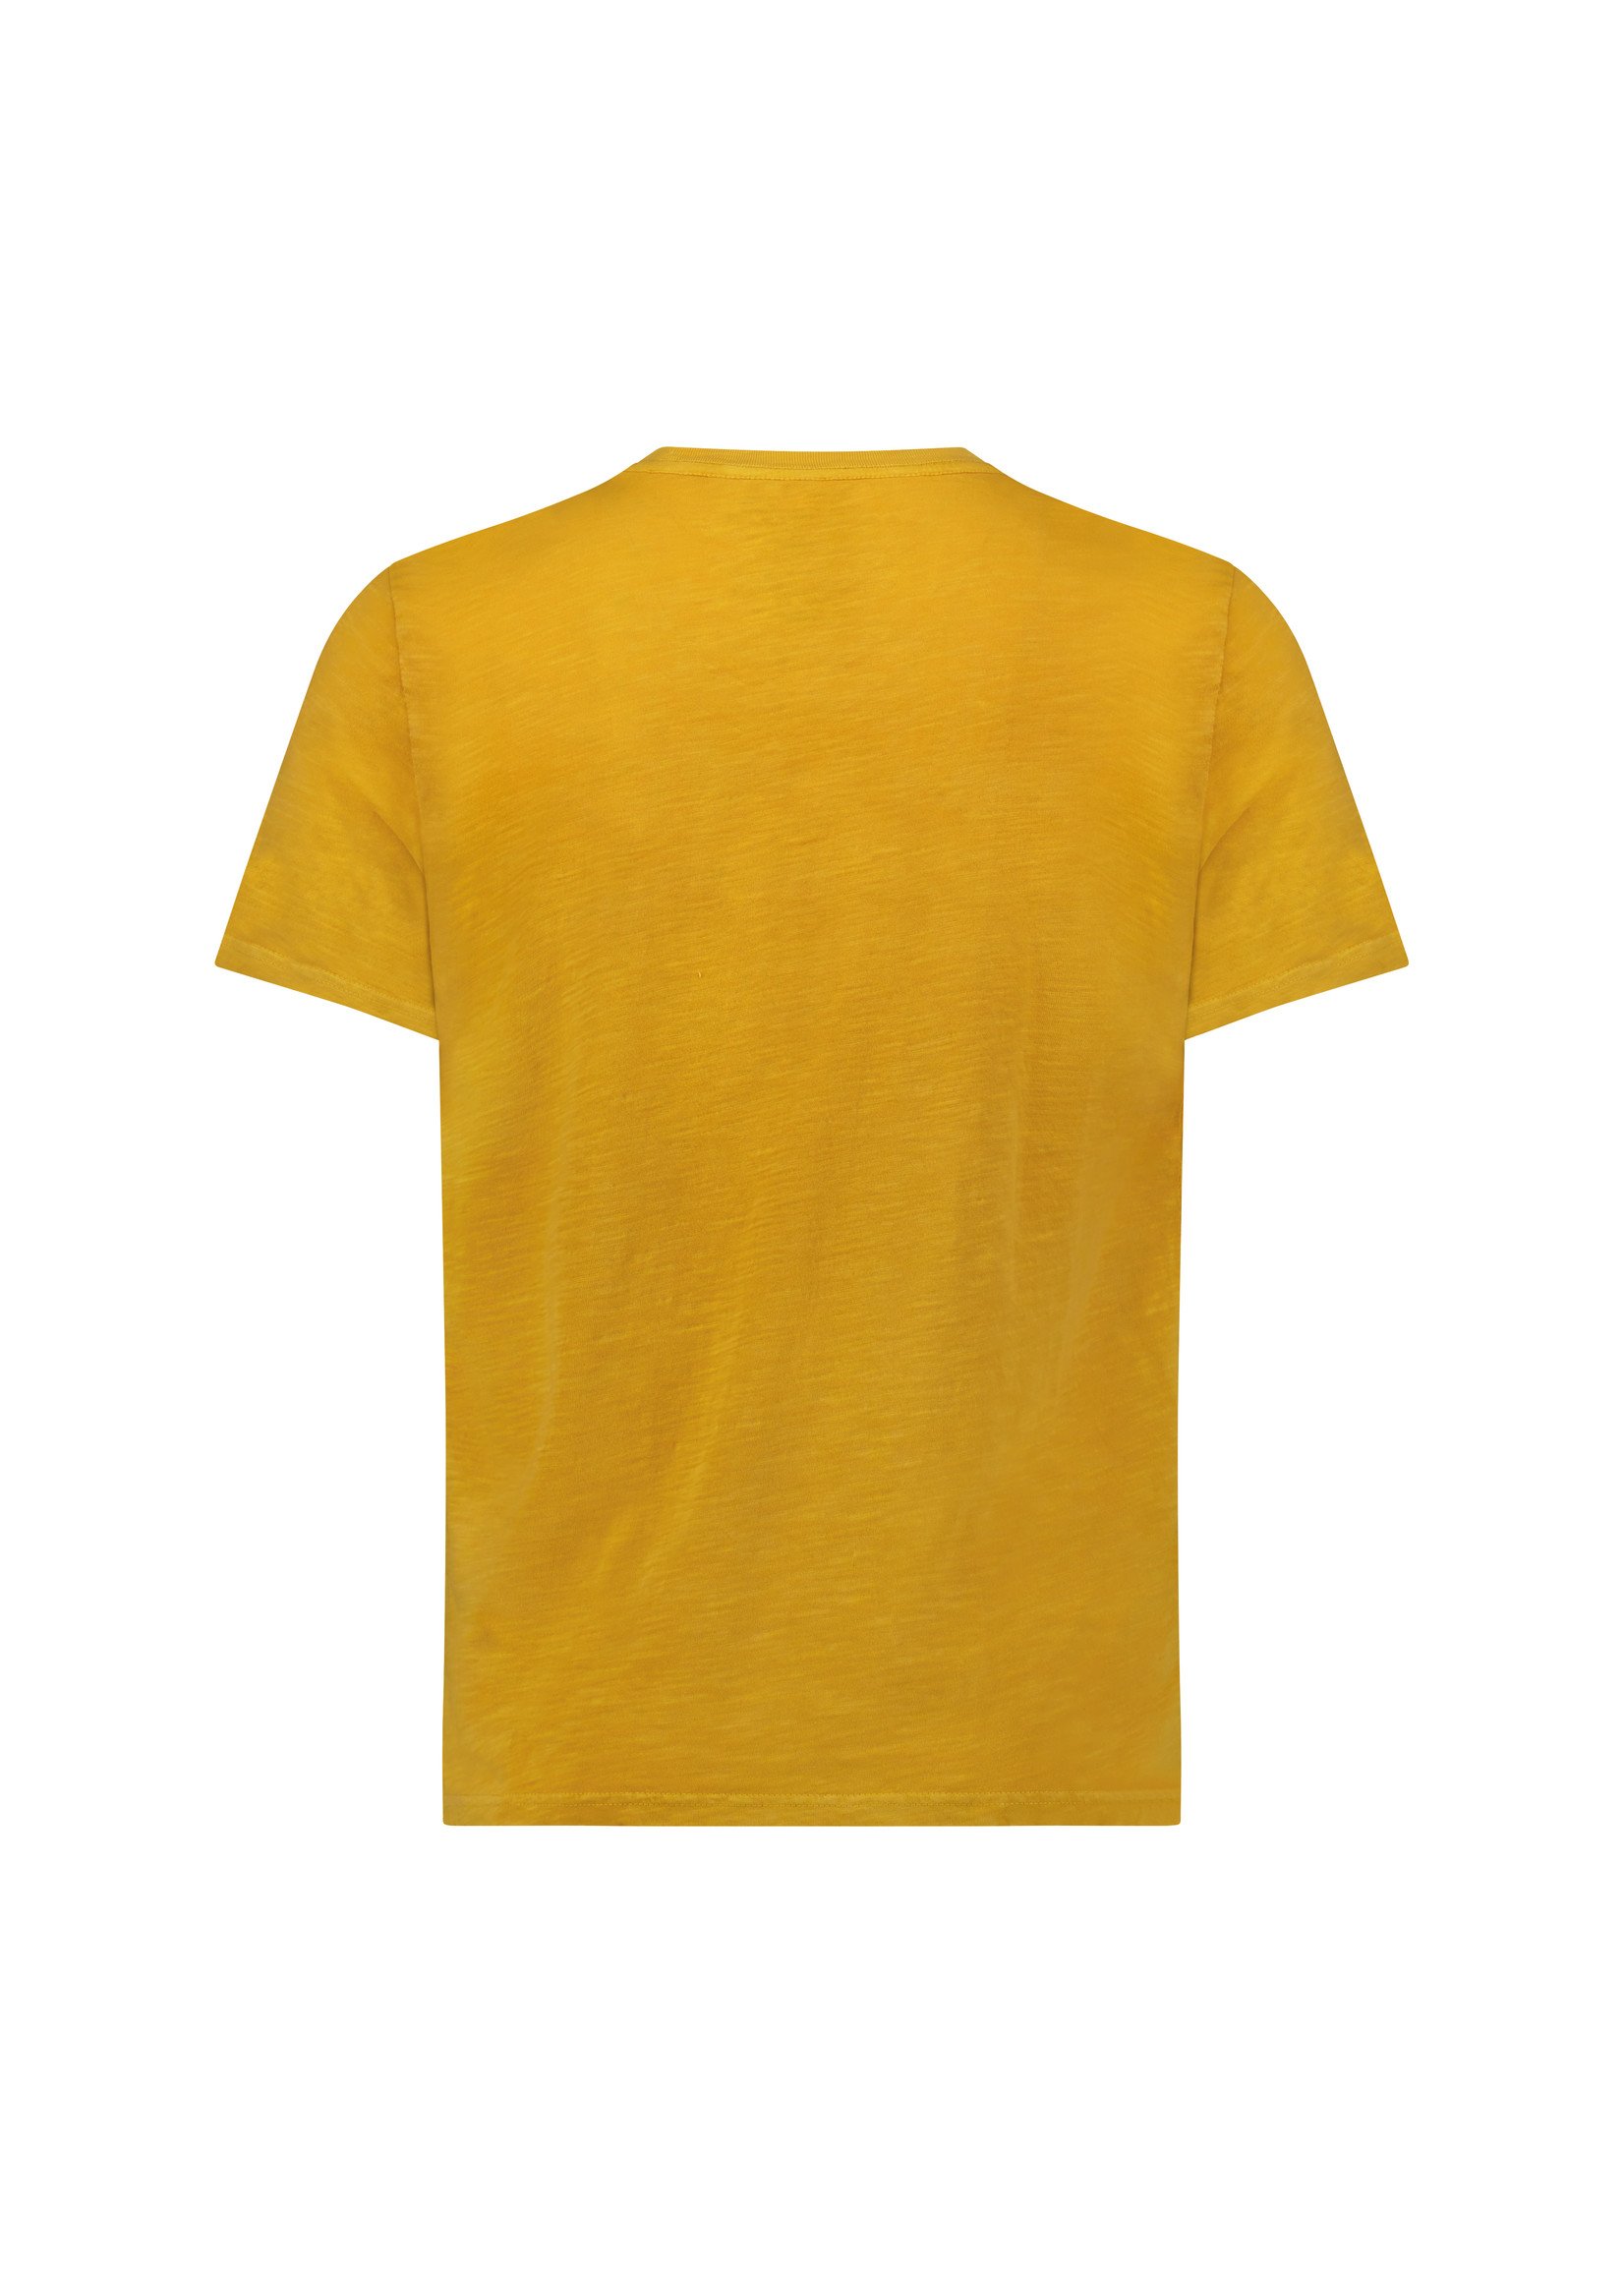 Pacifico Graphic Tee Yellow